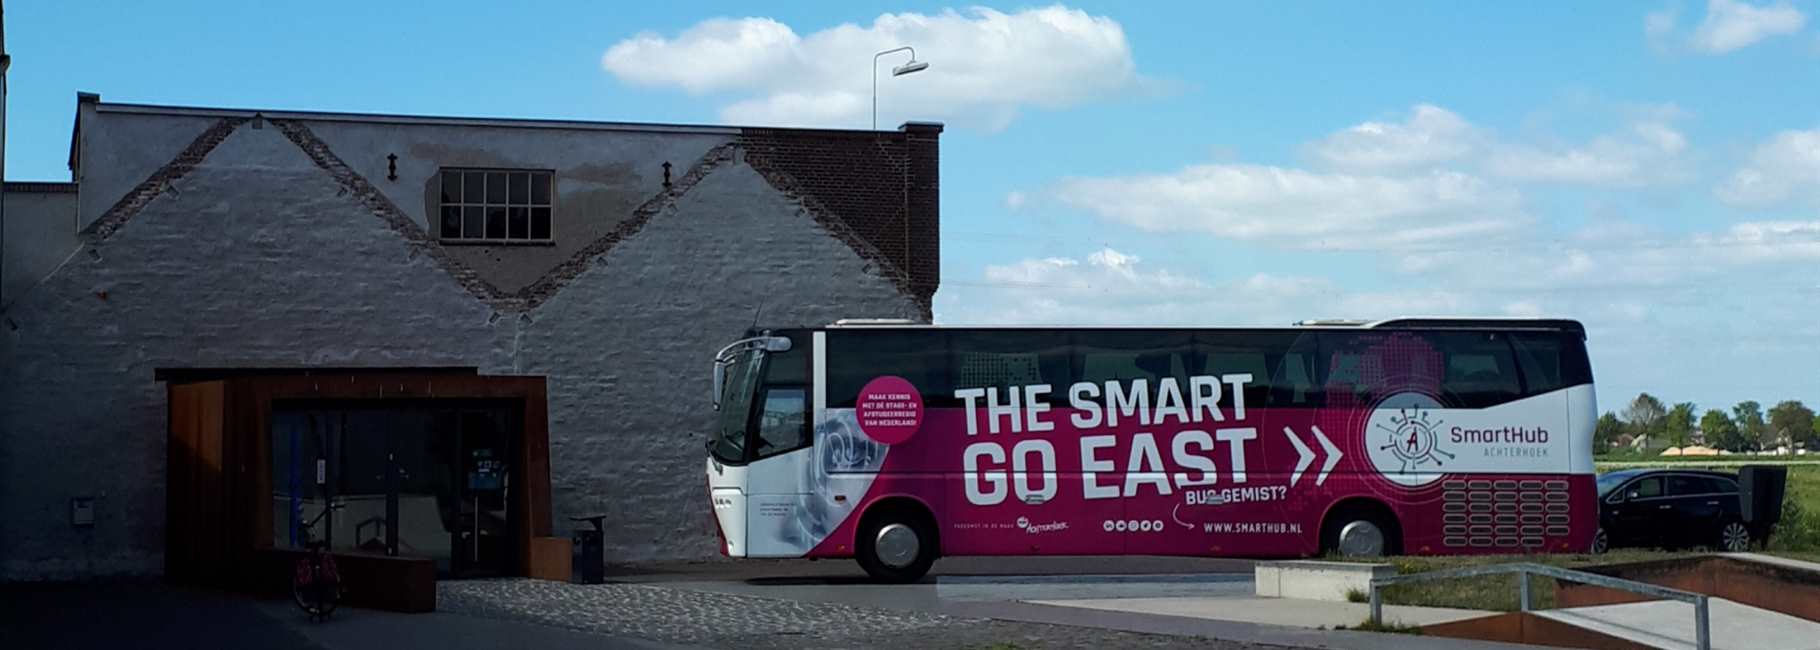 The smart go east